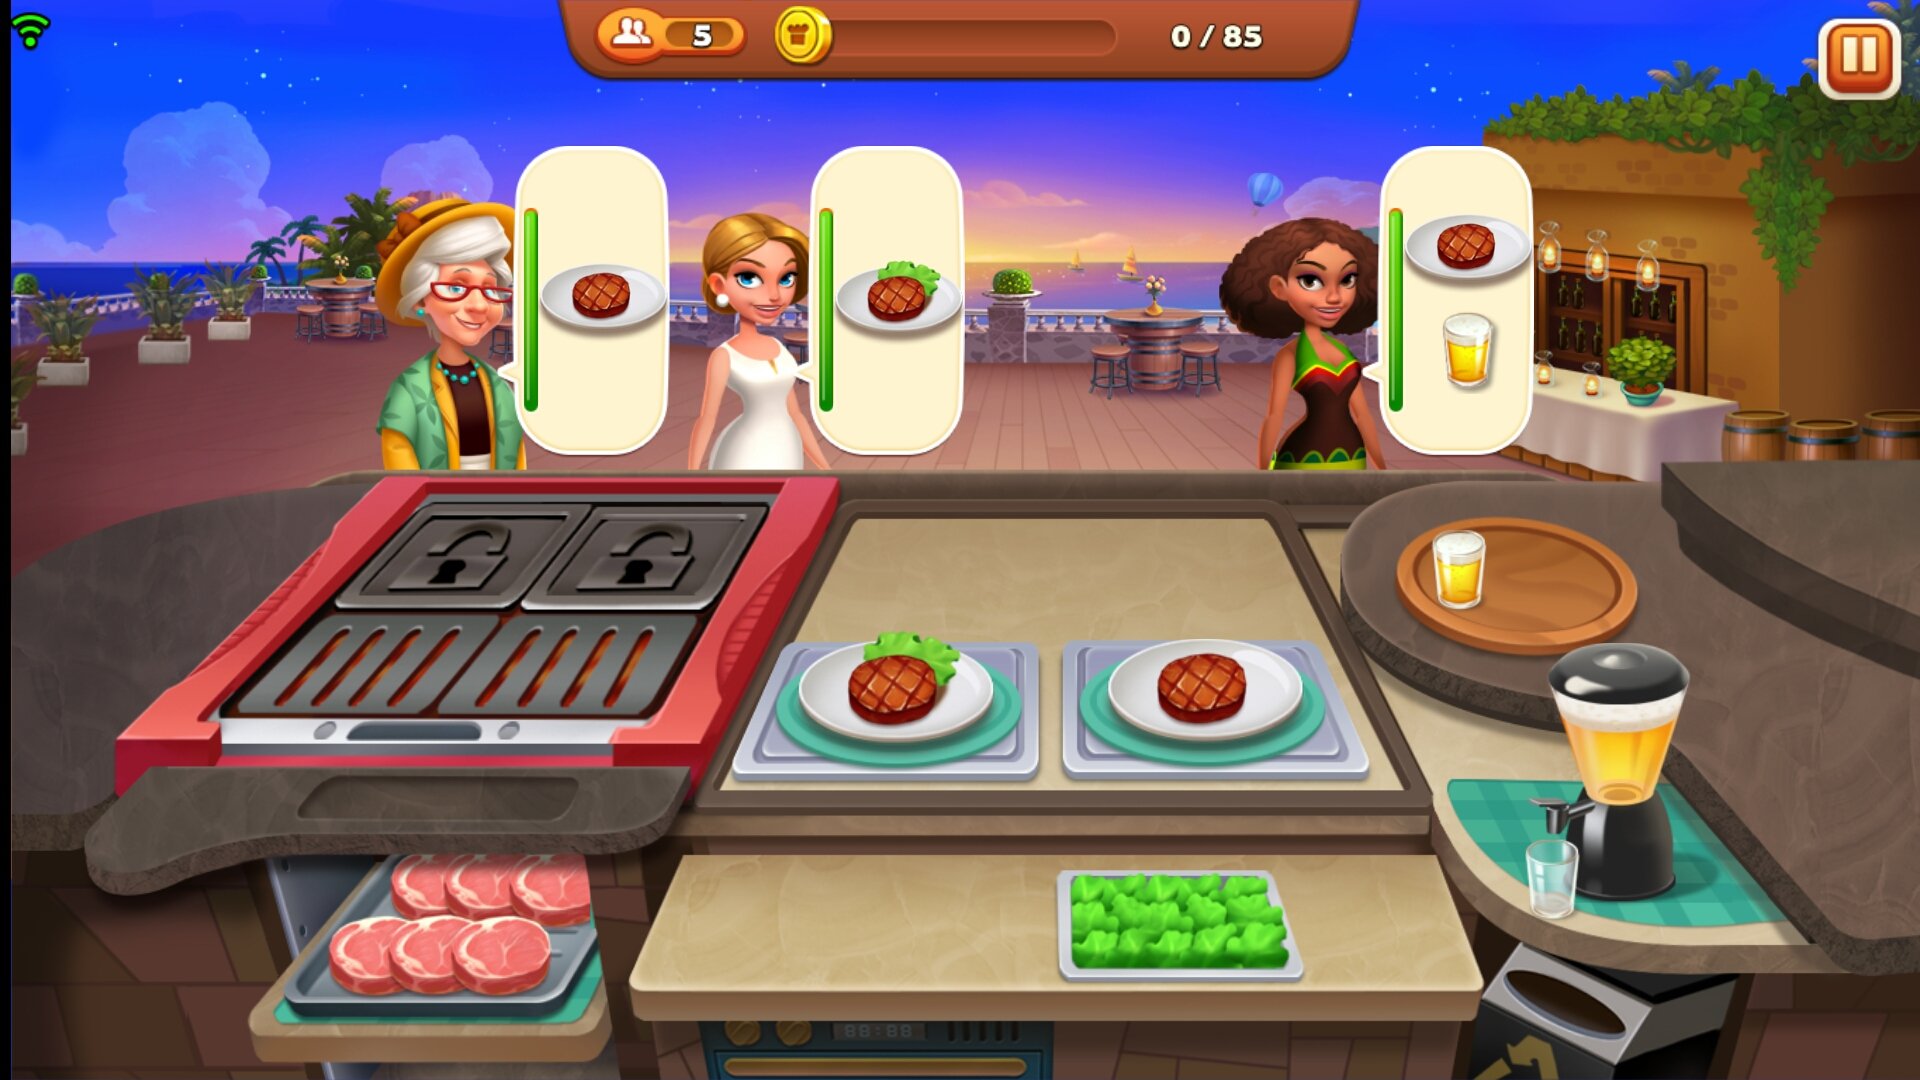 Cooking Live: Restaurant game downloading